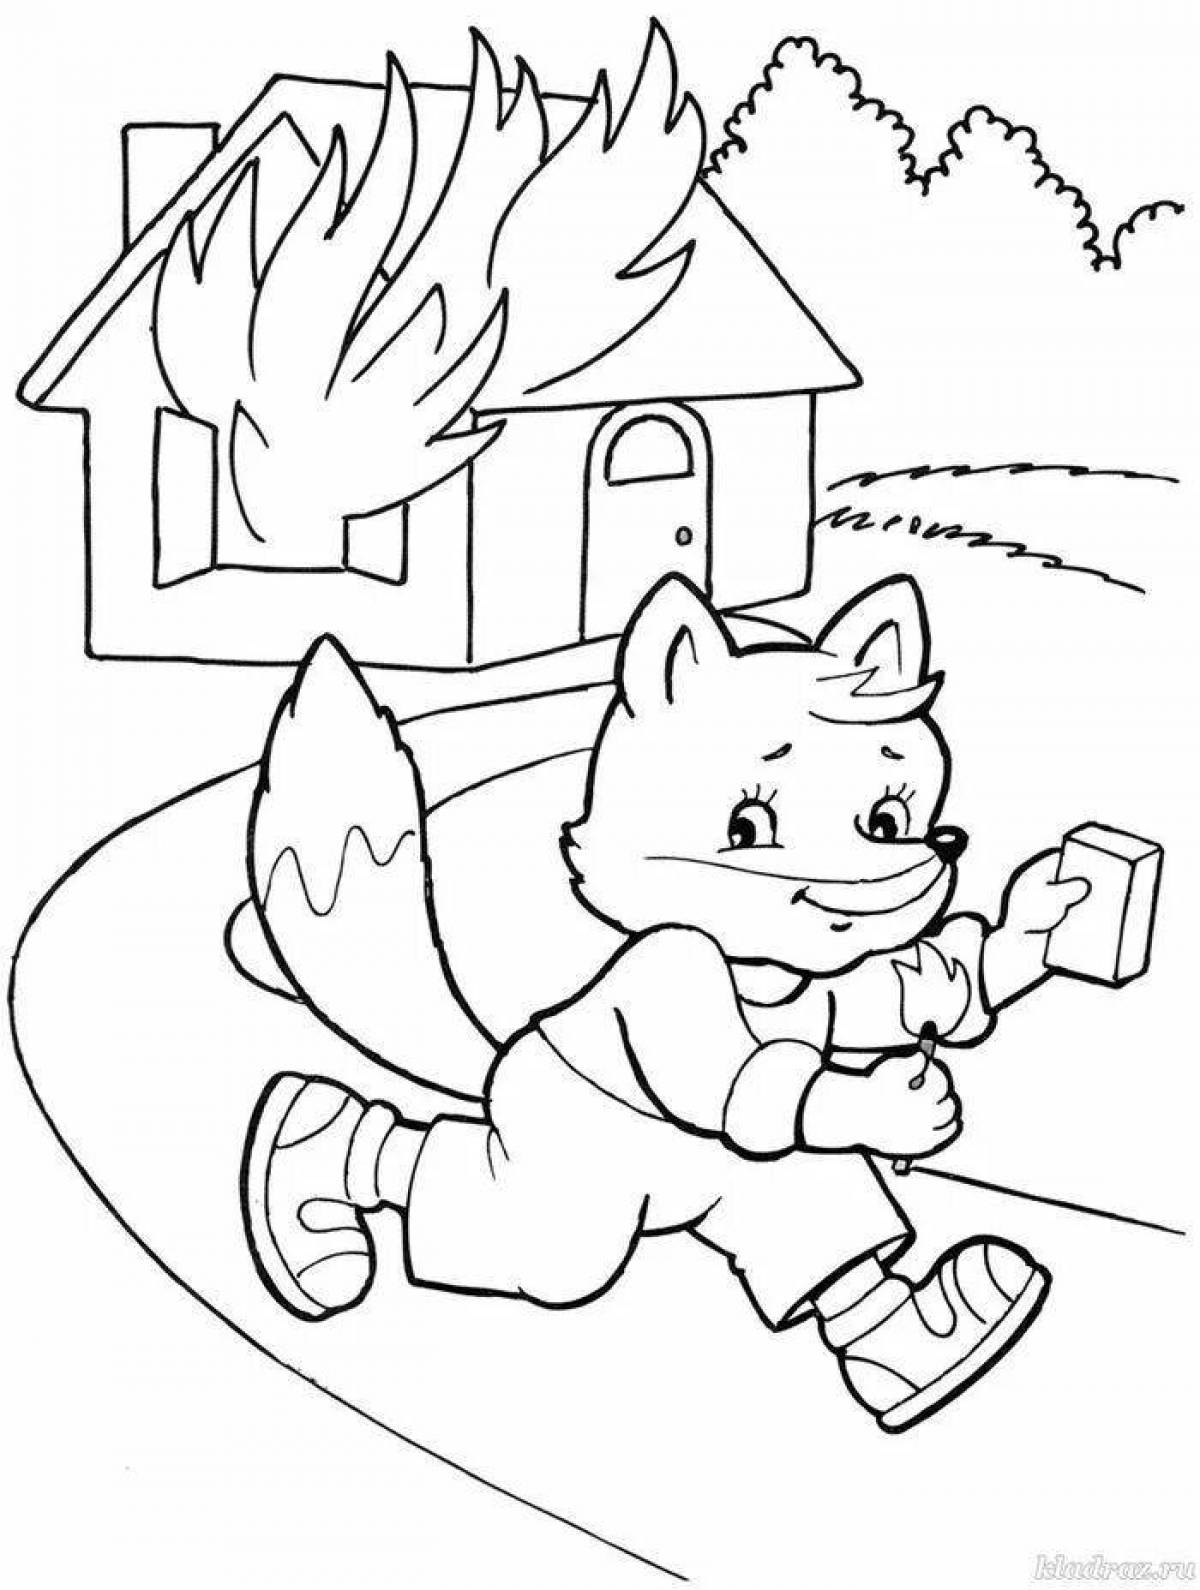 Colorful fire safety coloring page for 4-5 year olds